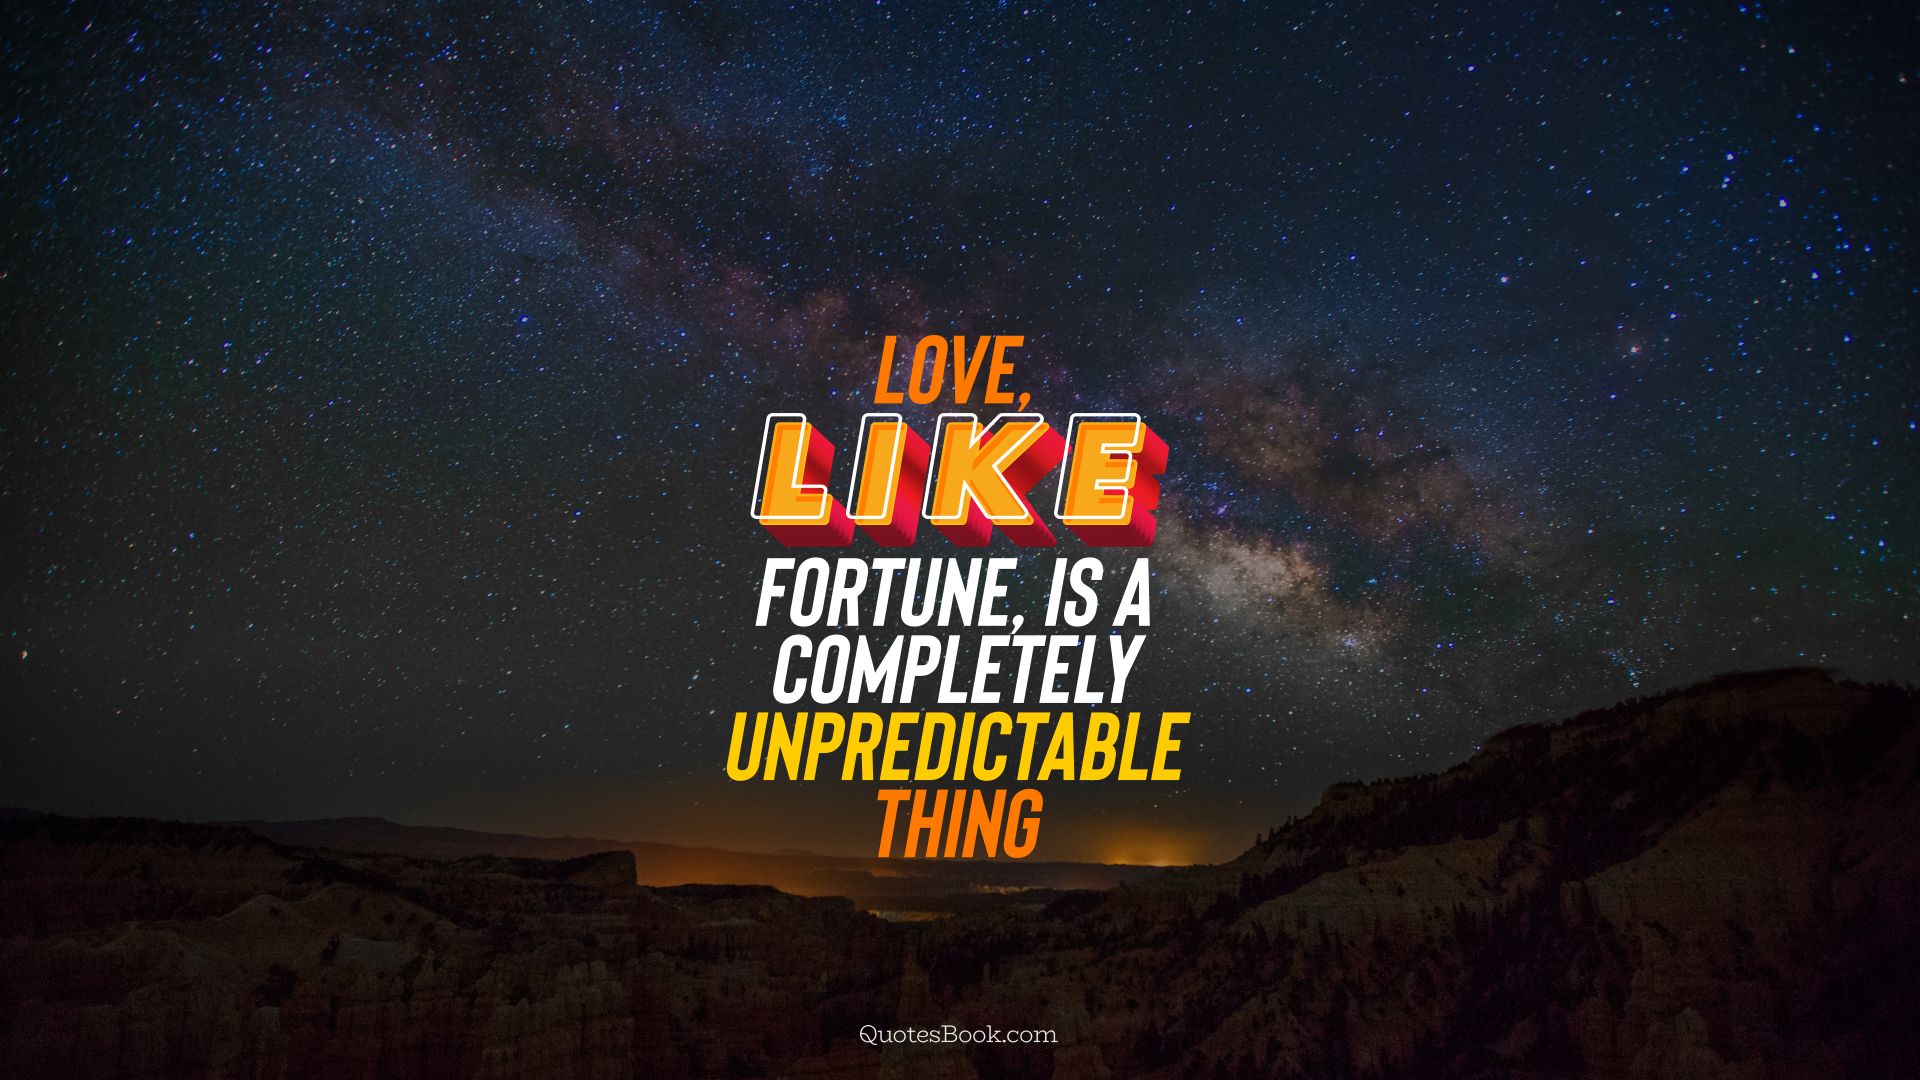 Love, like fortune, is a completely unpredictable thing. - Quote by QuotesBook